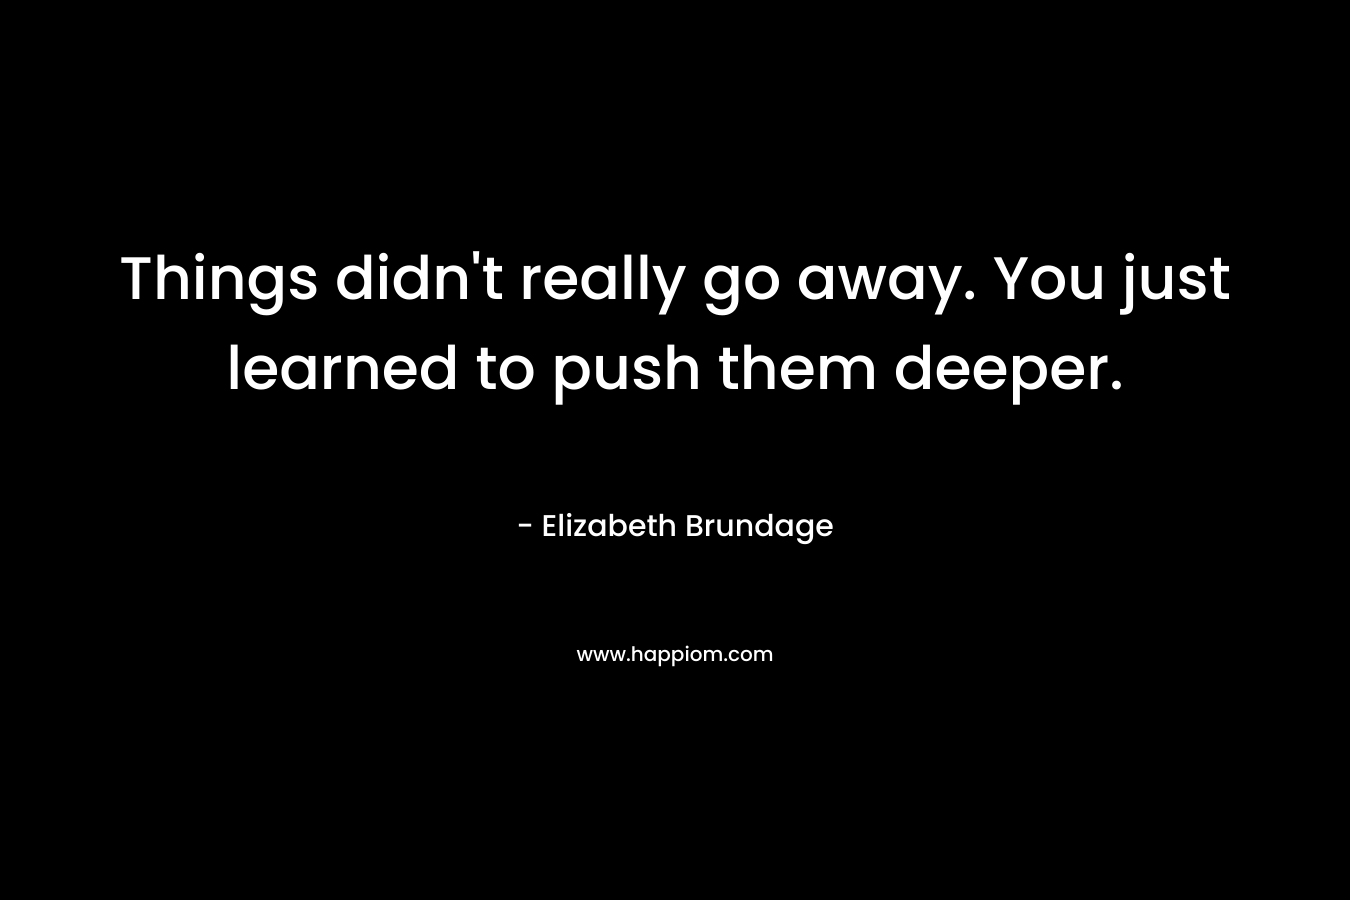 Things didn’t really go away. You just learned to push them deeper. – Elizabeth Brundage